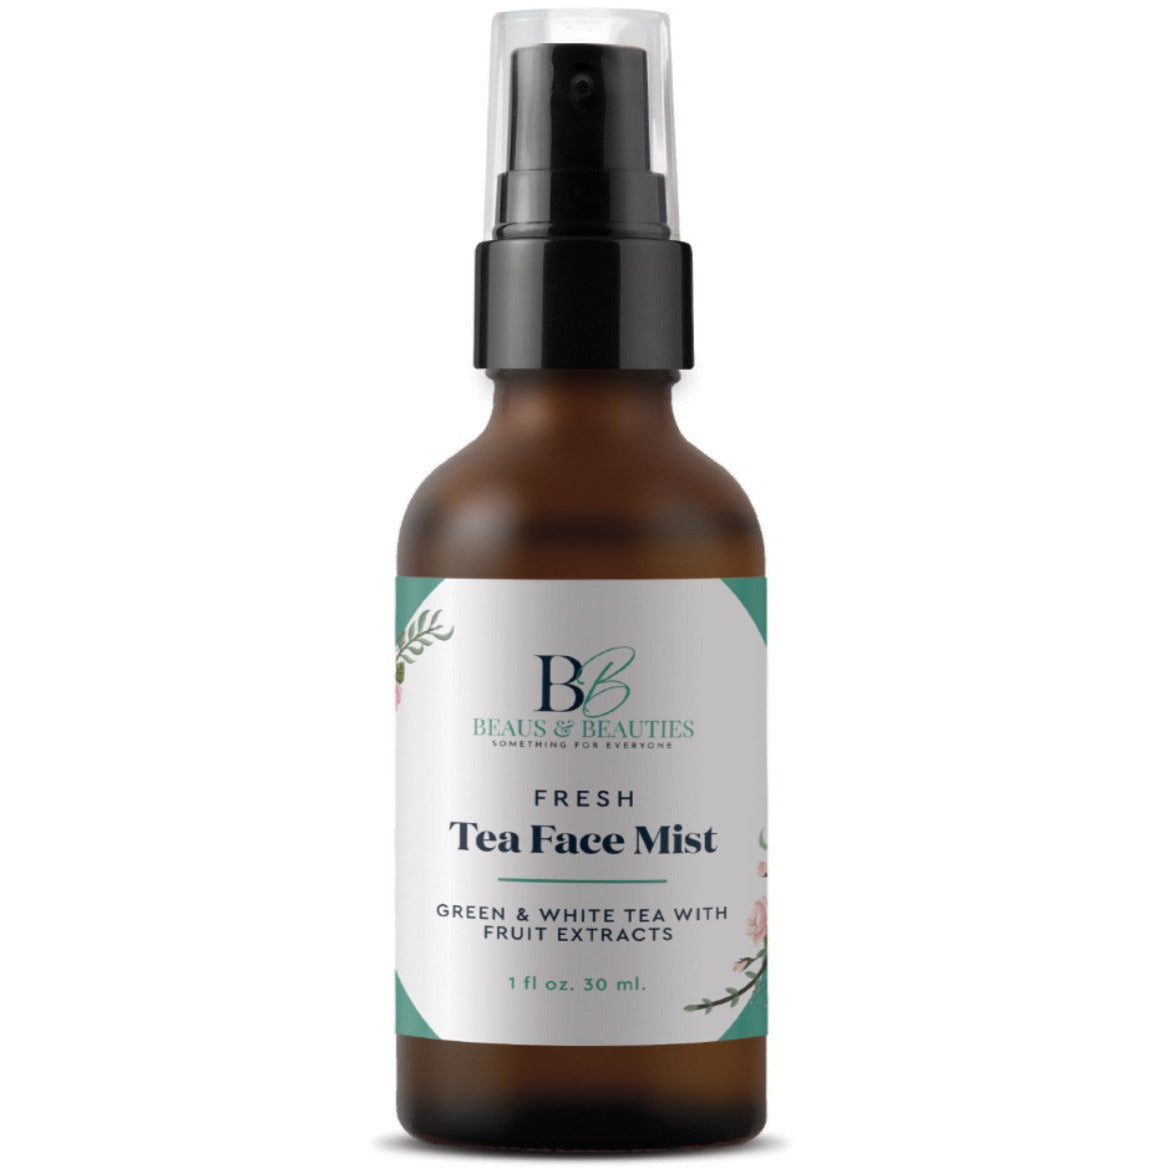 FRESH TEA FACE MIST by Beaus and Beauties